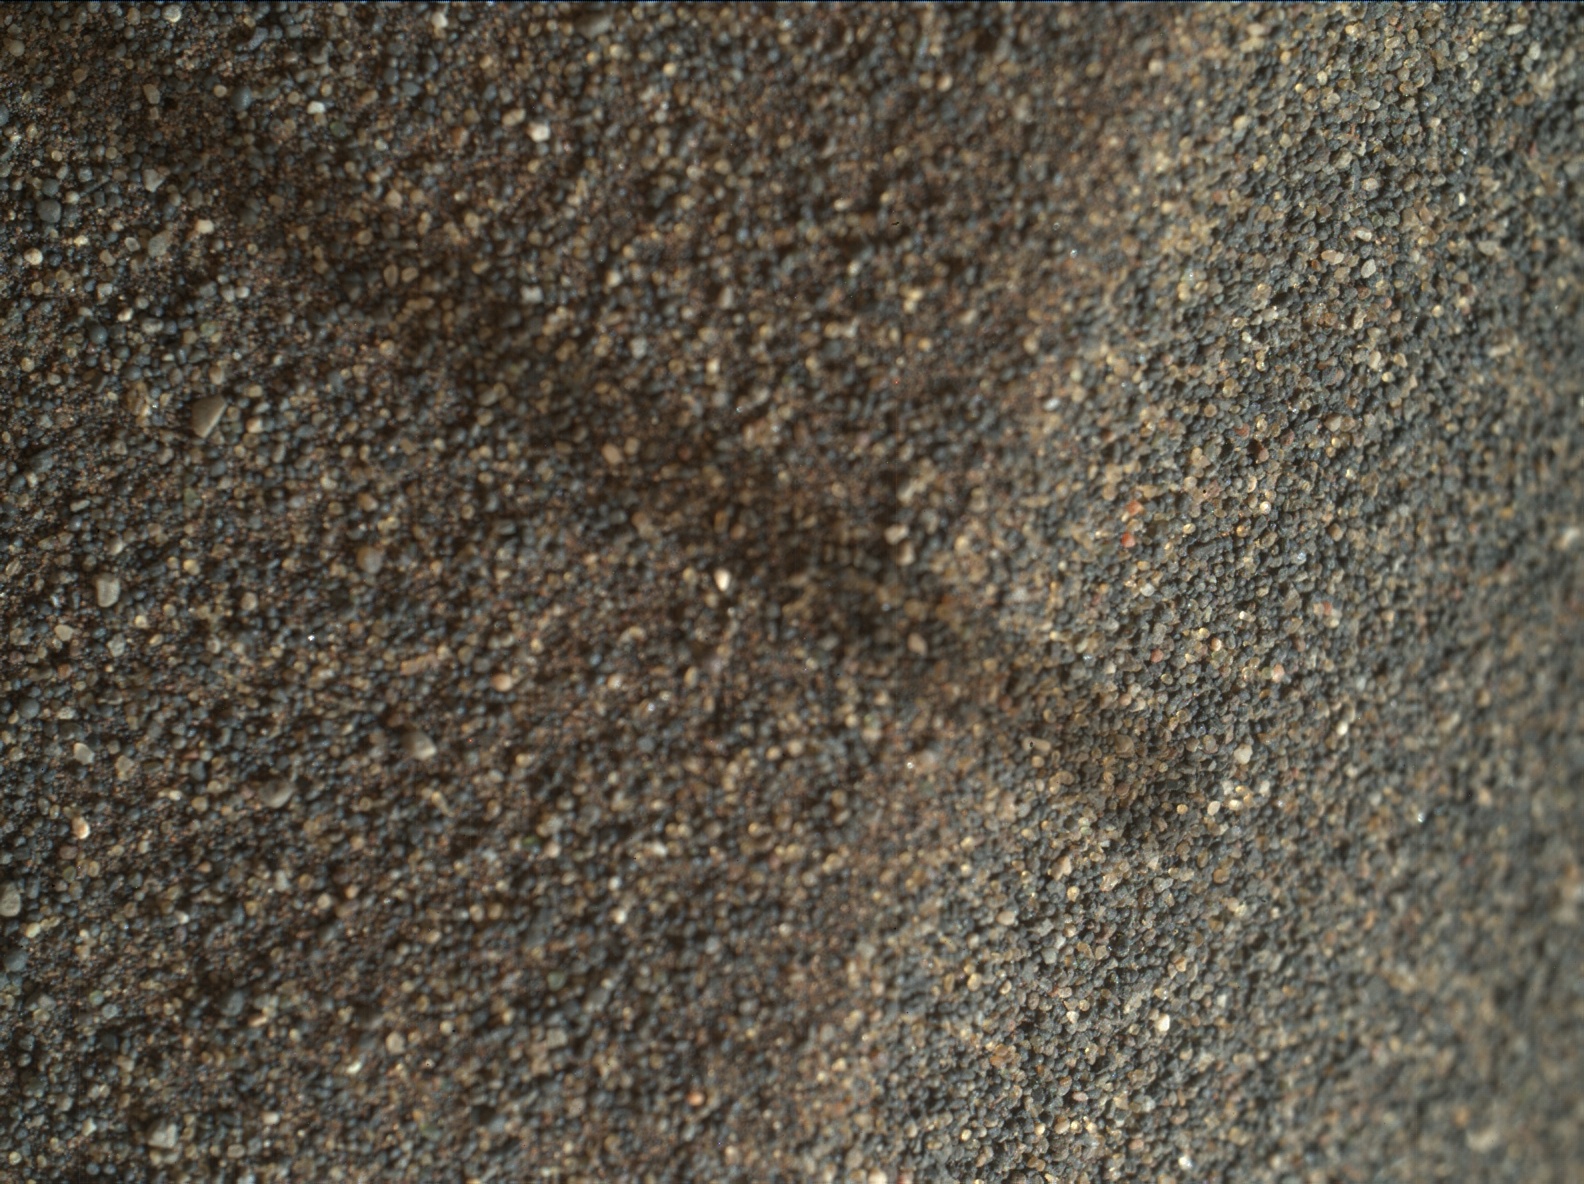 Nasa's Mars rover Curiosity acquired this image using its Mars Hand Lens Imager (MAHLI) on Sol 1638